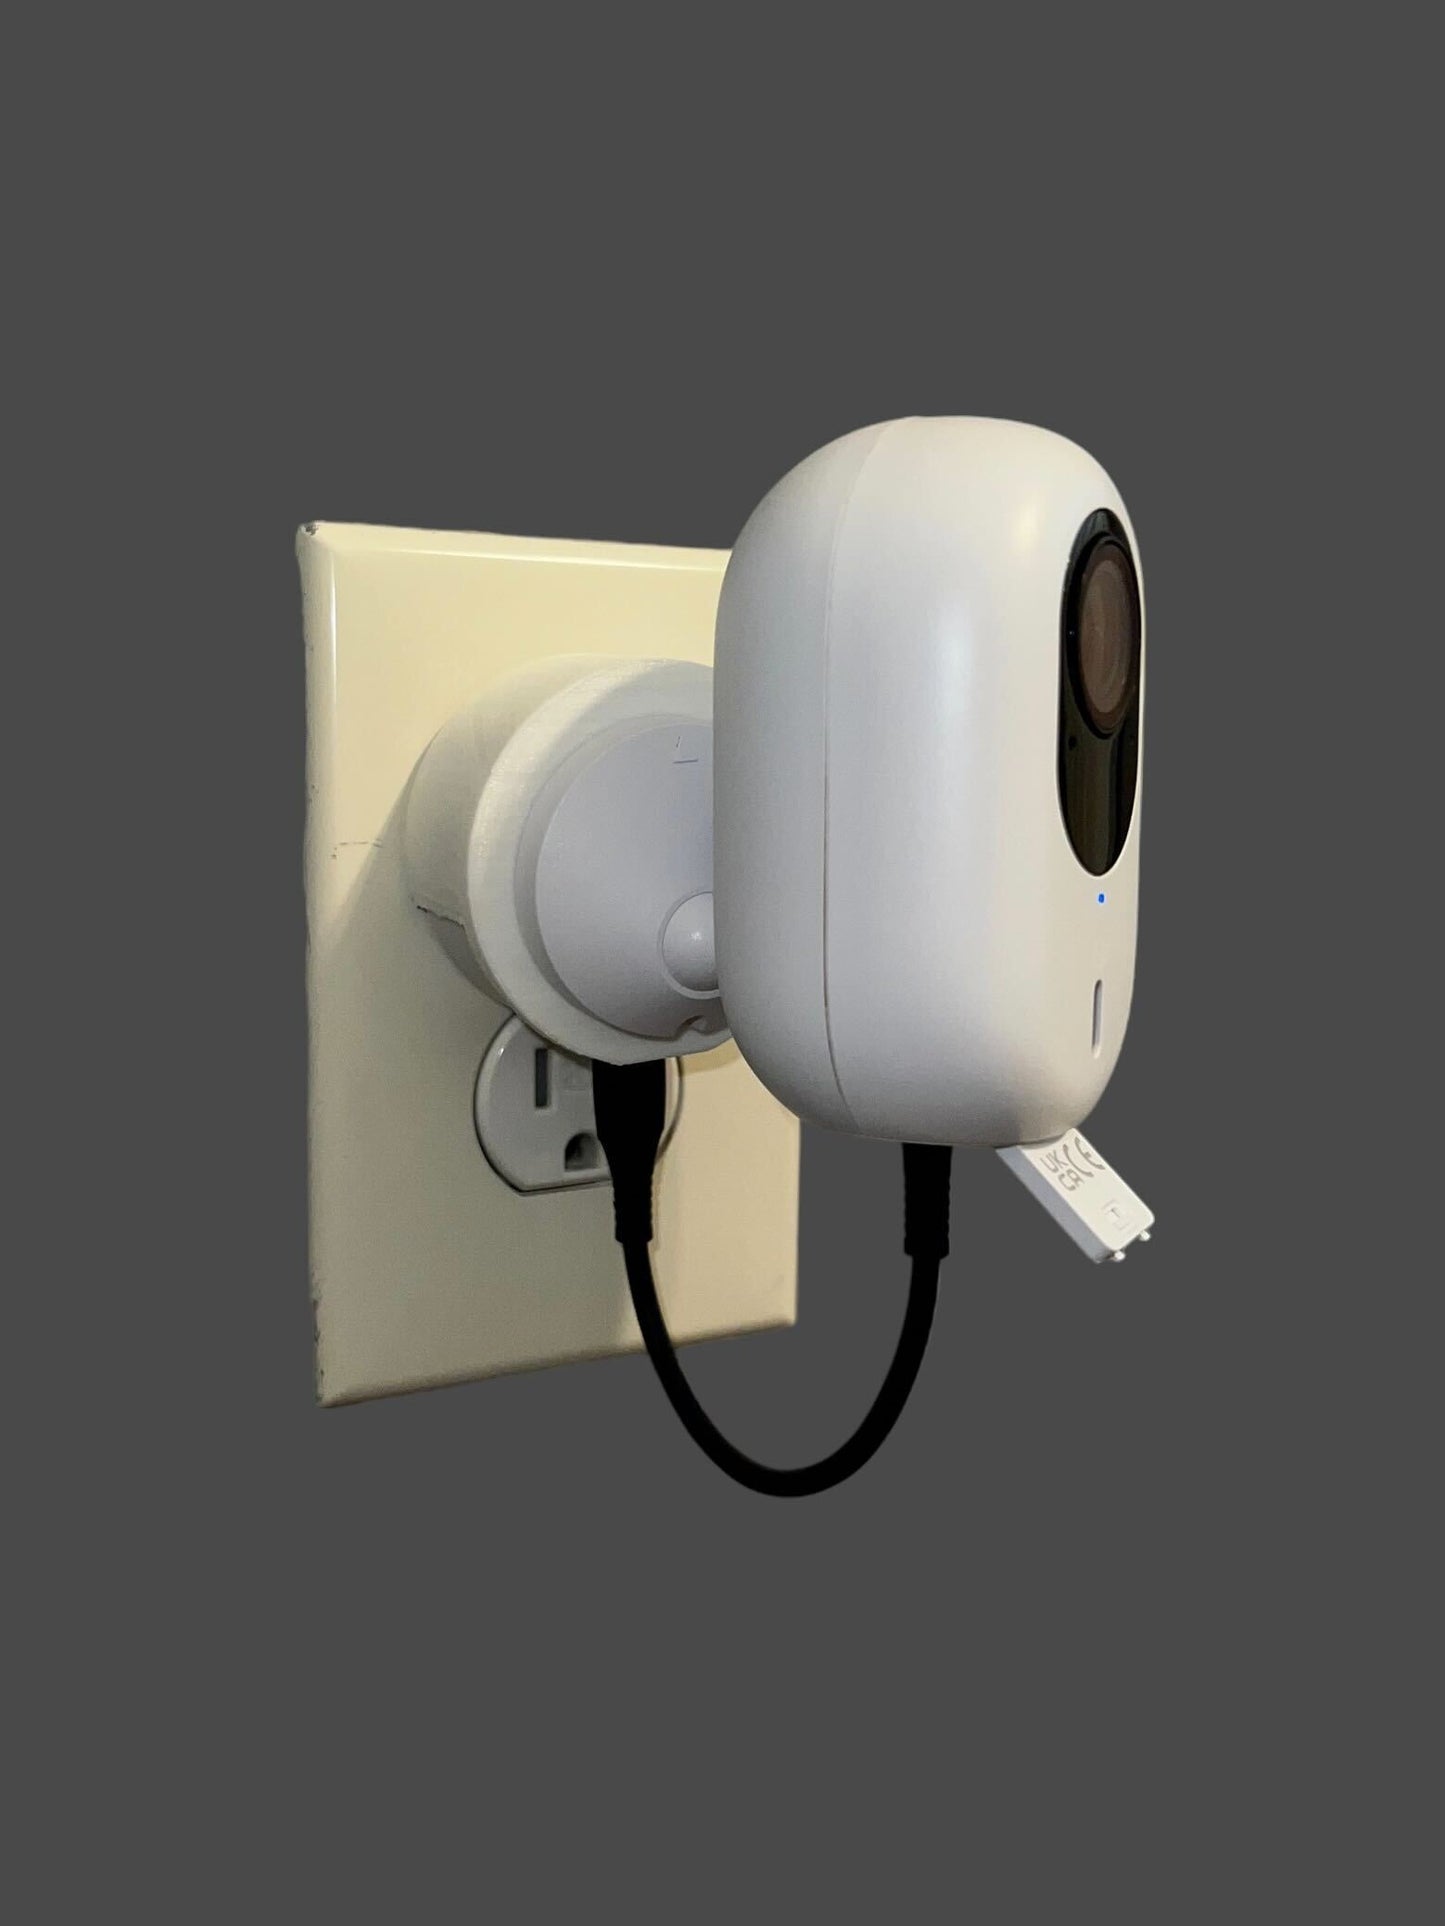 Outlet Mounting Kit for Unifi Protect G4 Instant Camera (FREE Wire Included)